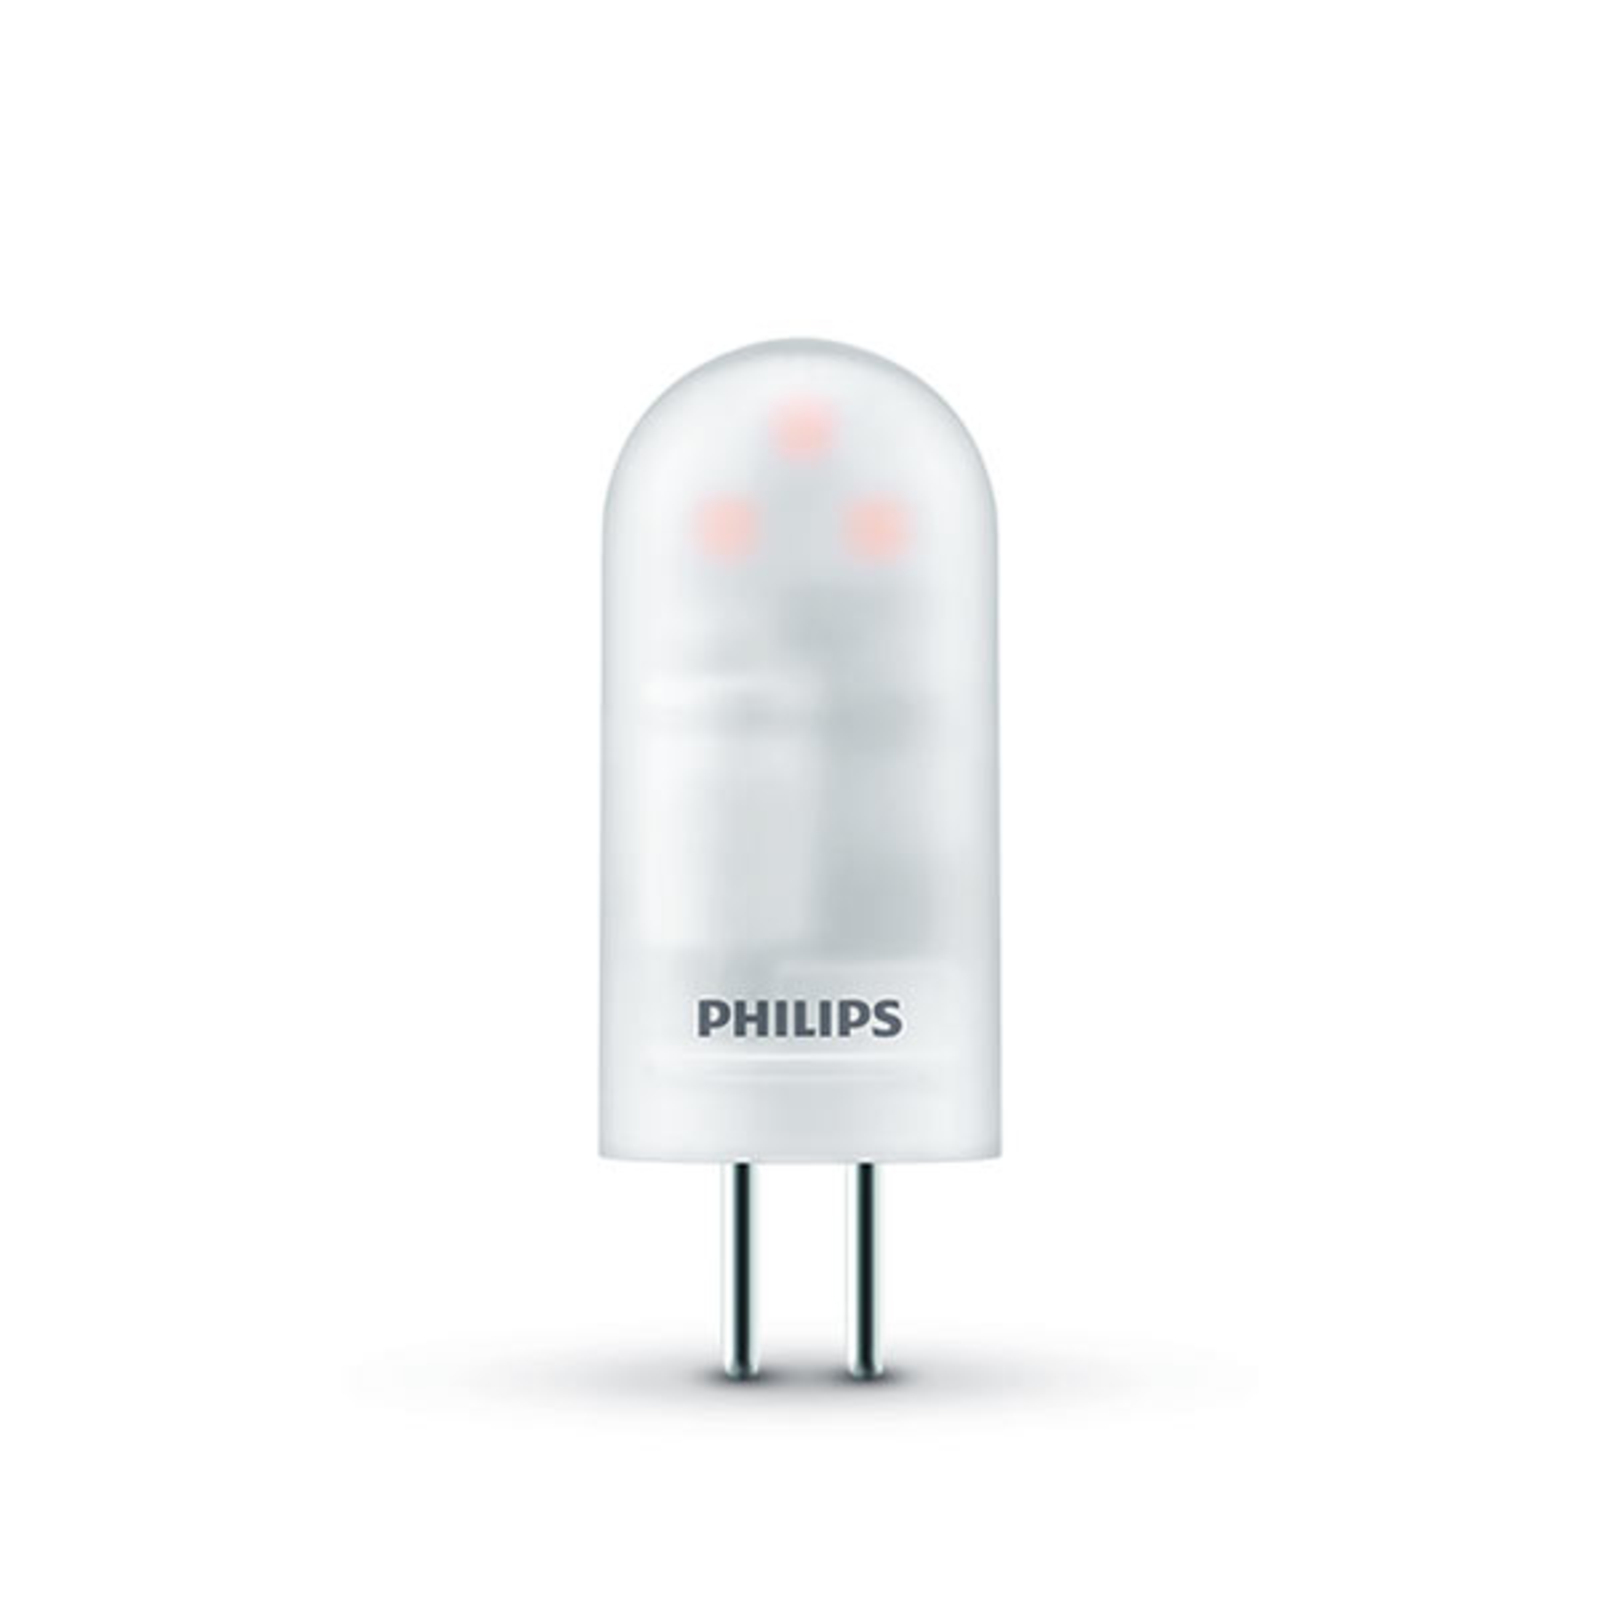 Philips ampoule LED à broches G4 1,8 W 827